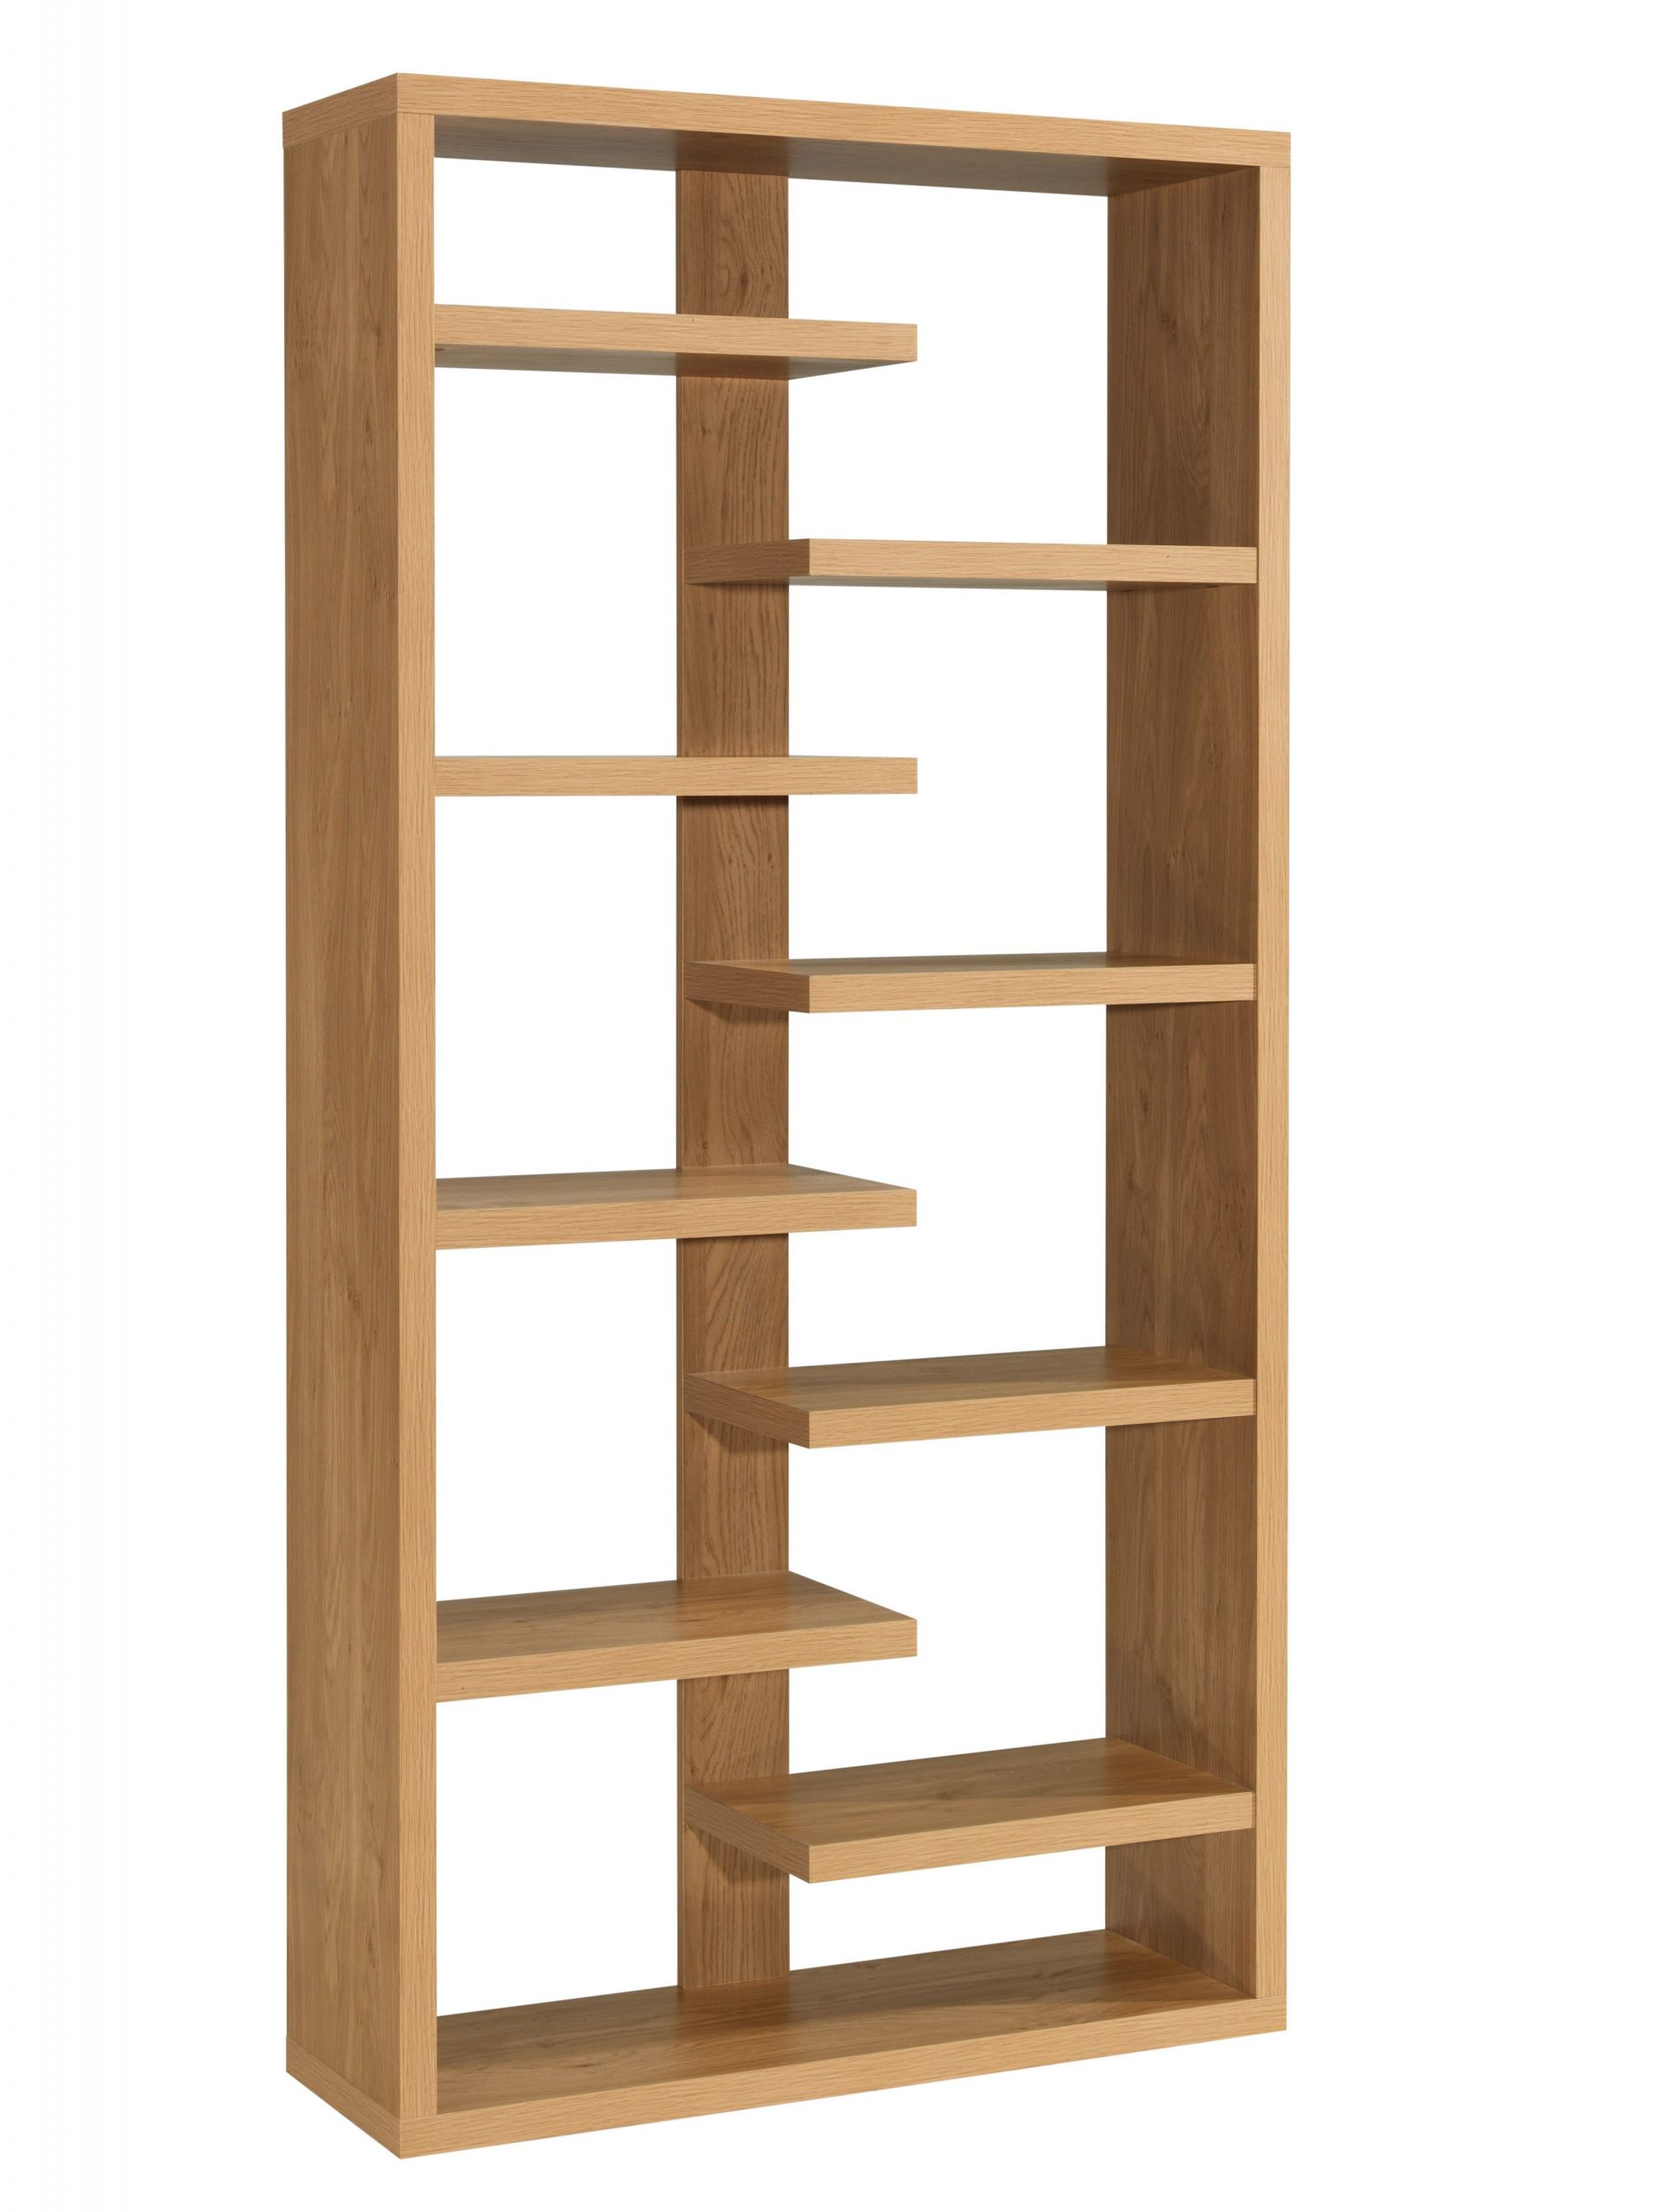 Toronto Display In 2019 Wood Floating Shelves with sizing 3012 X 4000